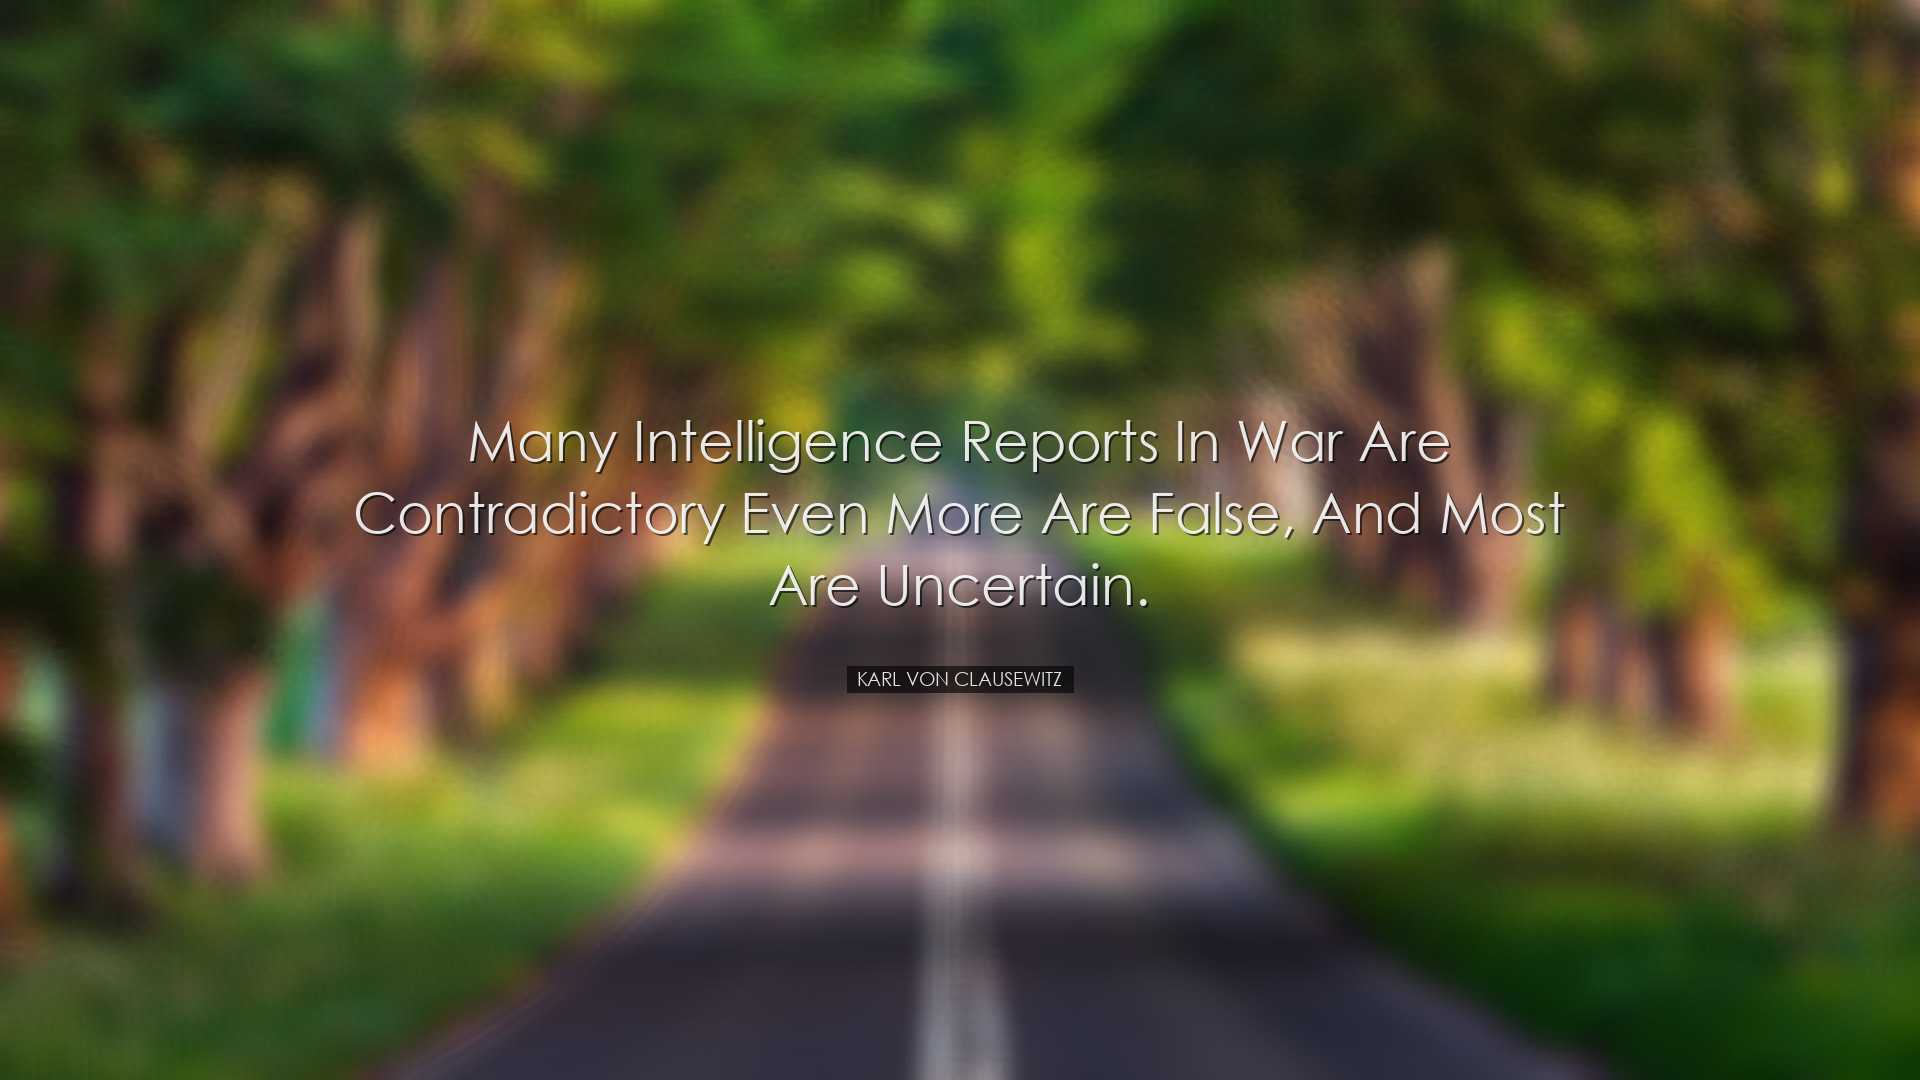 Many intelligence reports in war are contradictory even more are f